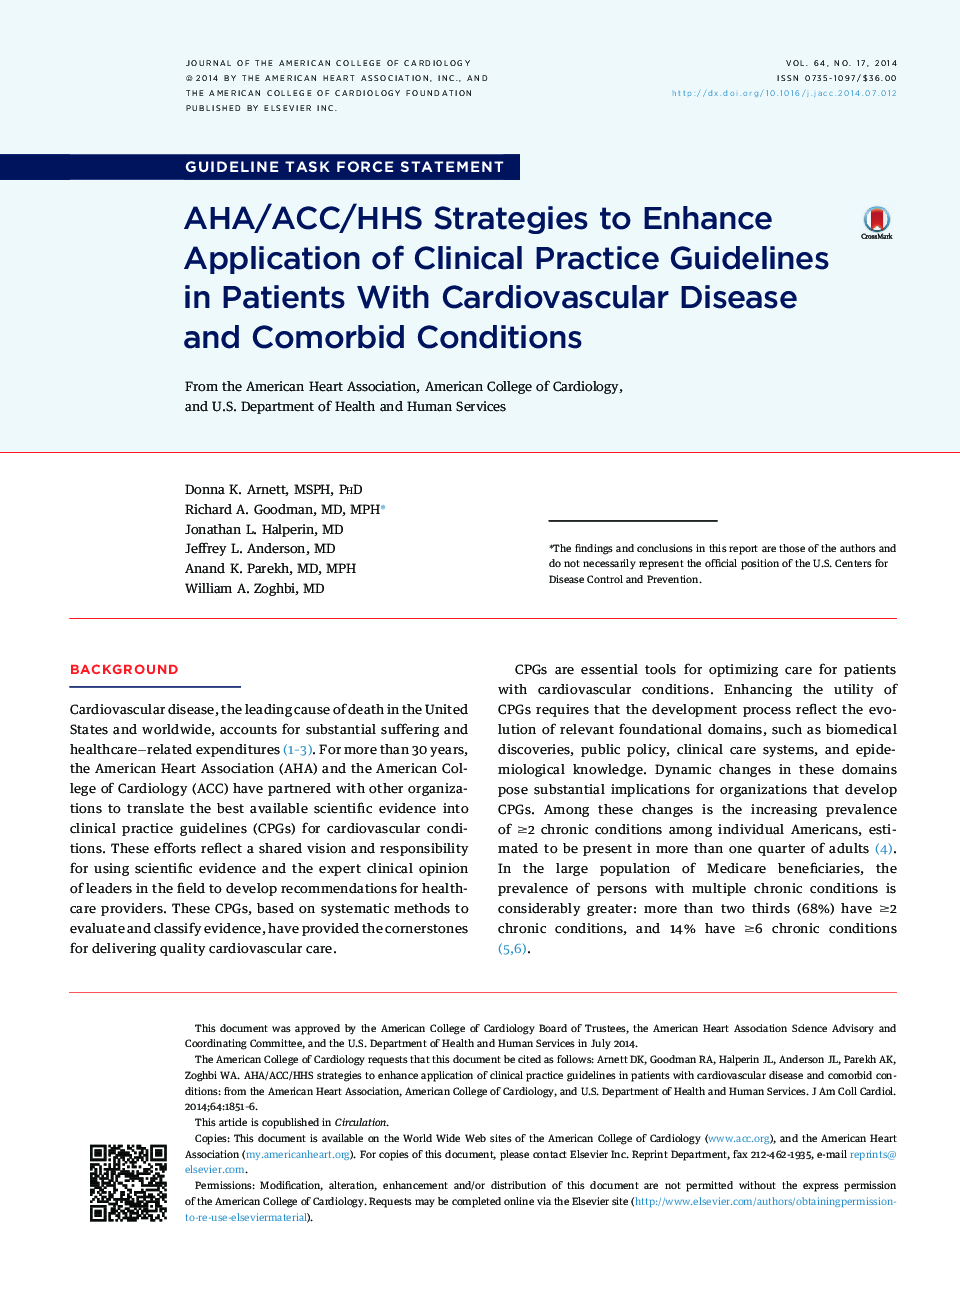 AHA/ACC/HHS Strategies to Enhance Application of Clinical Practice Guidelines in Patients With Cardiovascular Disease and Comorbid Conditions